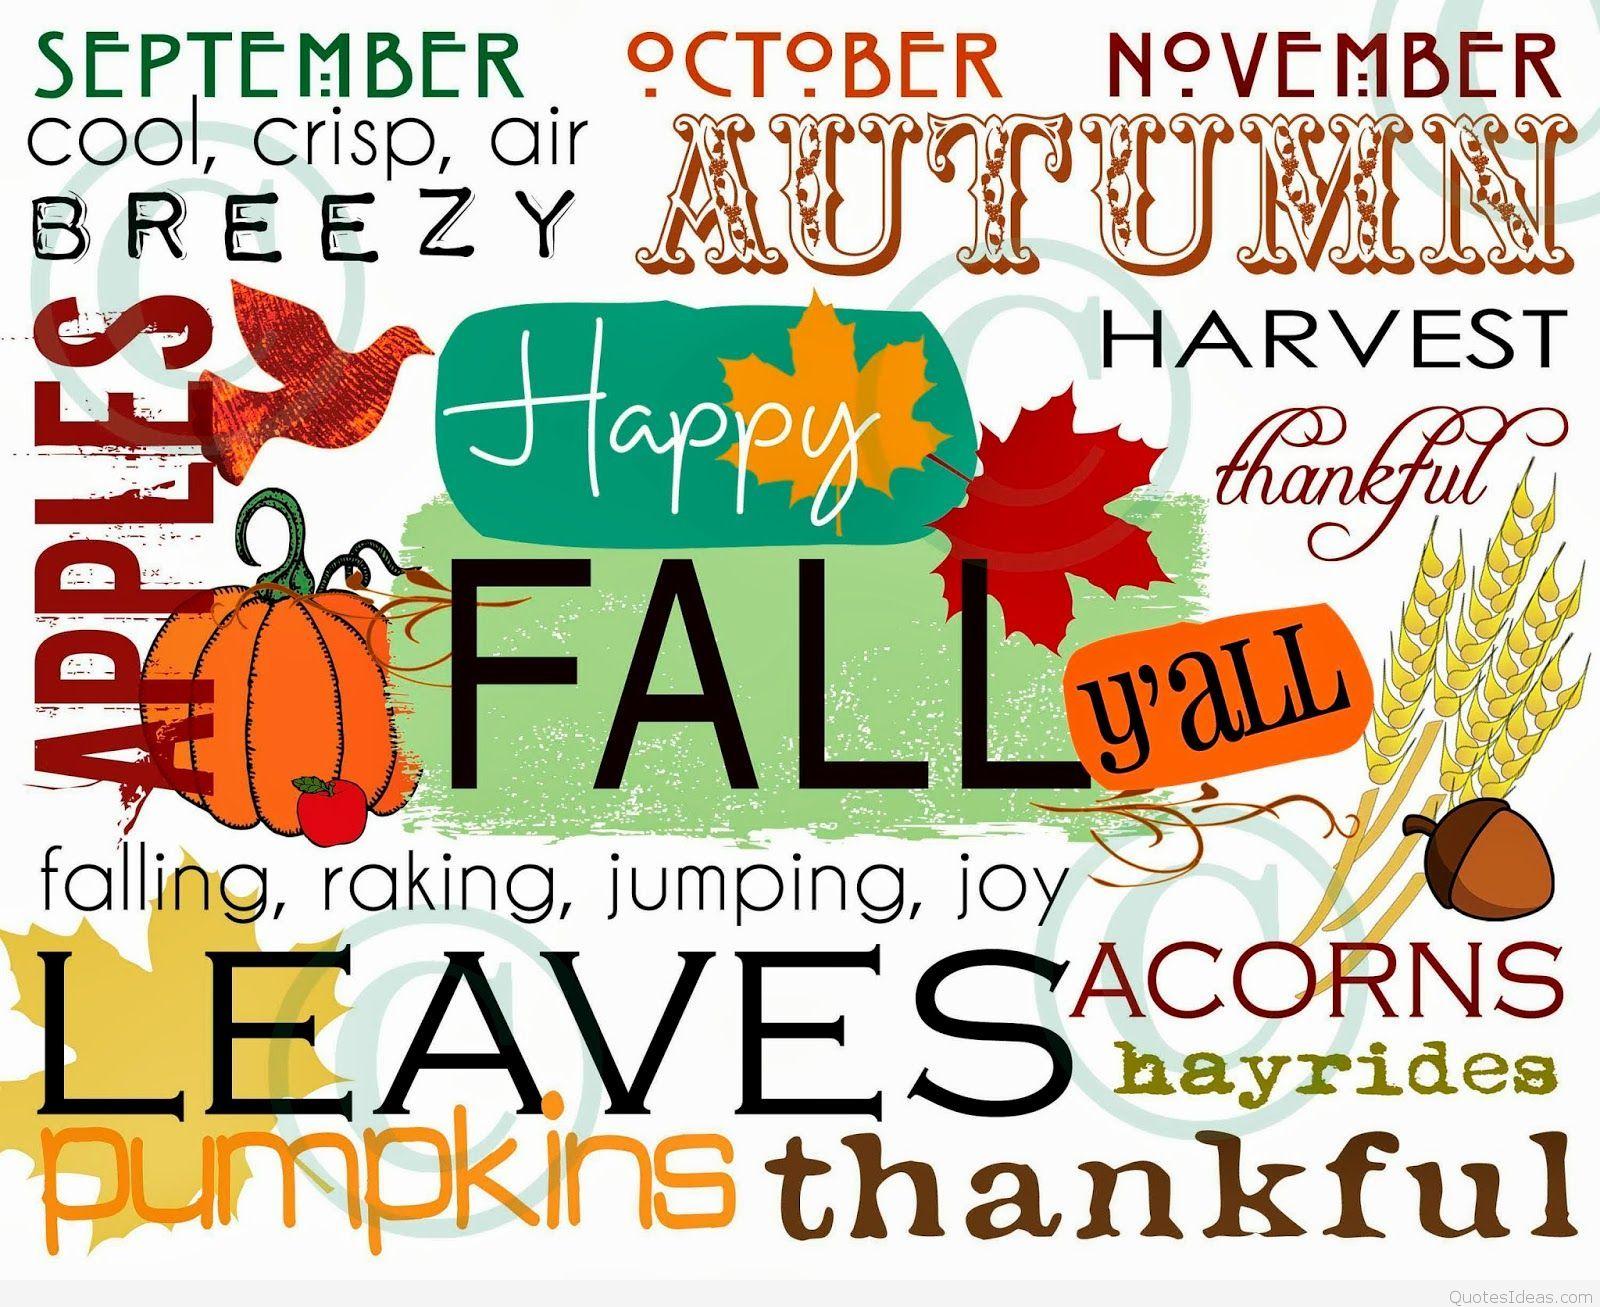 Happy first day of Autumn quotes, image and wallpaper